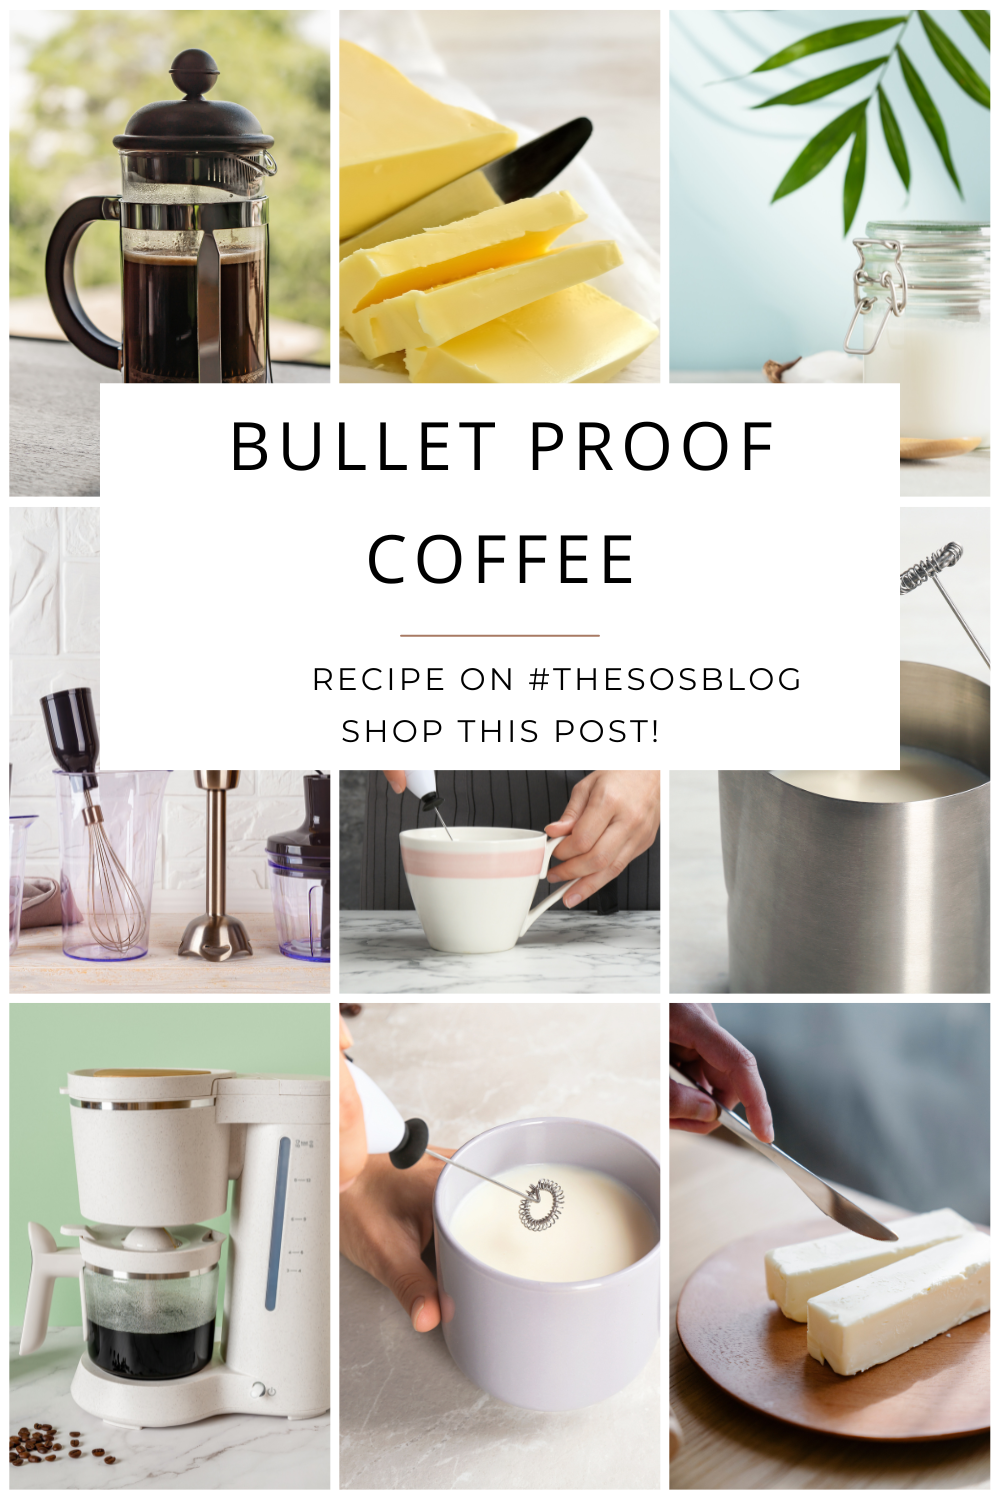 shoppable post with what you need to make bullet proof coffee, post has a grid of pictures with coffee makers, butter, coconut oil and mixing devices, bullet proof coffee near me, original bulletproof coffee recipe, where to buy bulletproof coffee, bulletproof coffee pros and cons